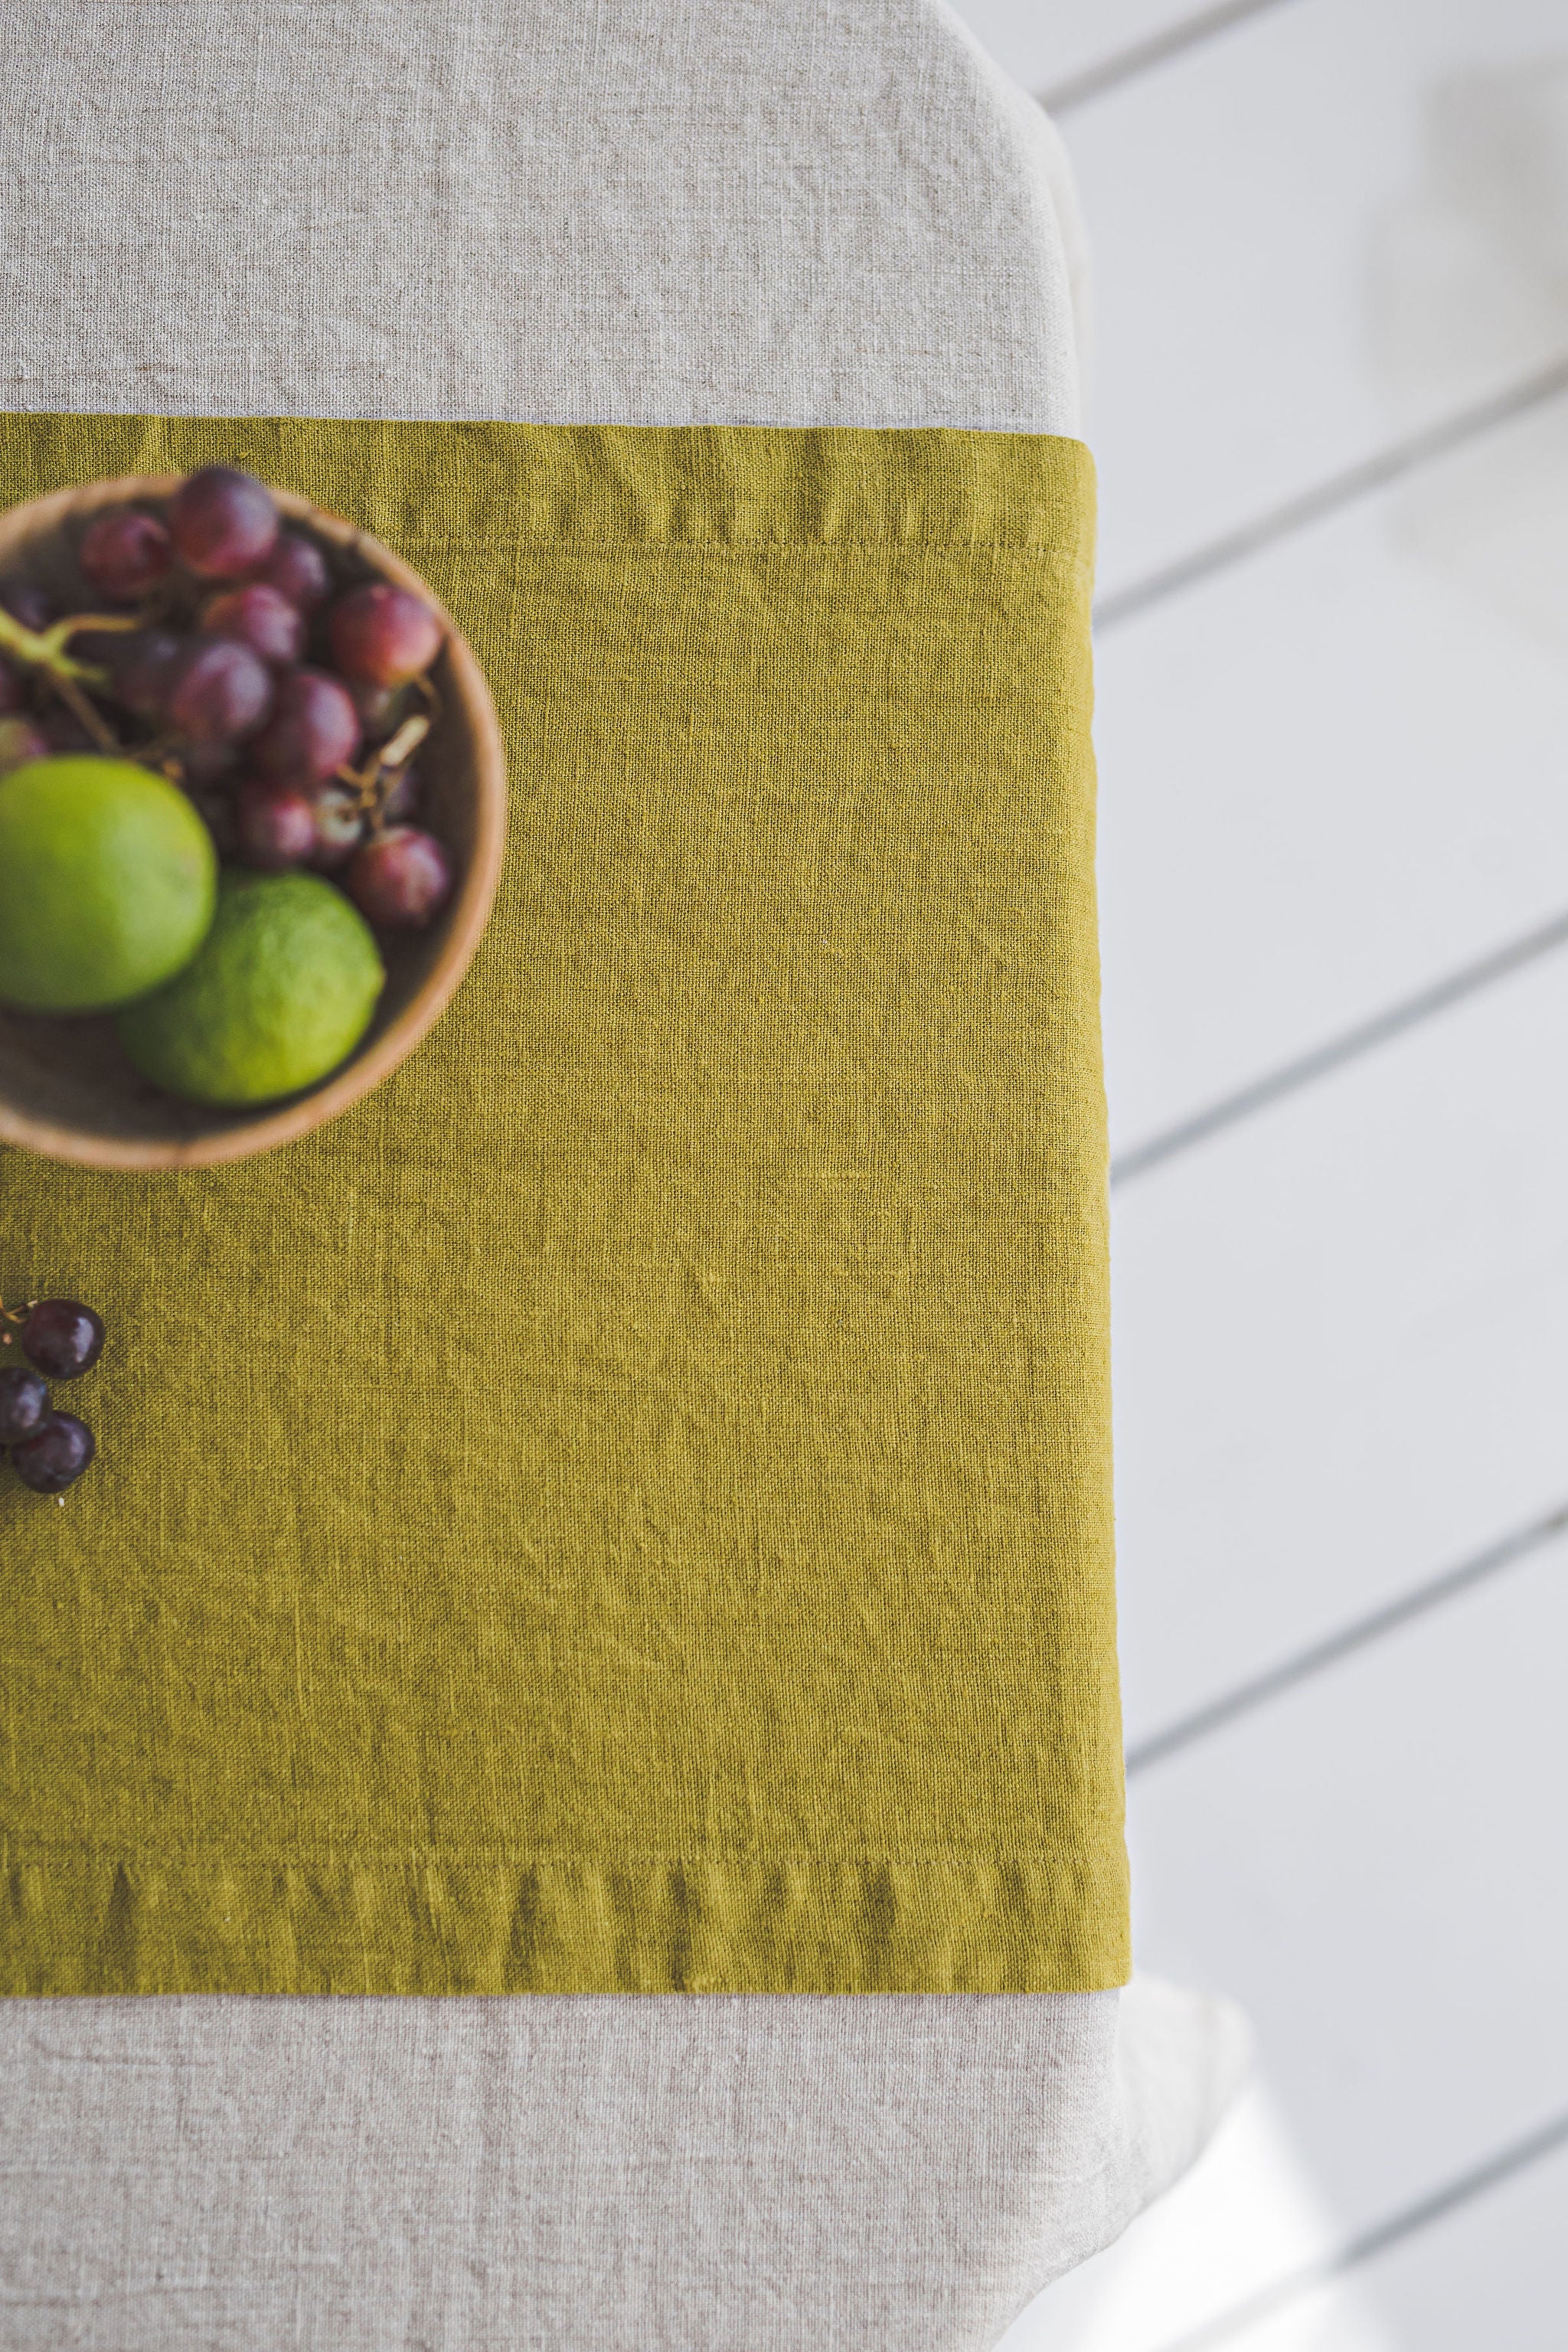 Olive green linen table runner with mitered corners